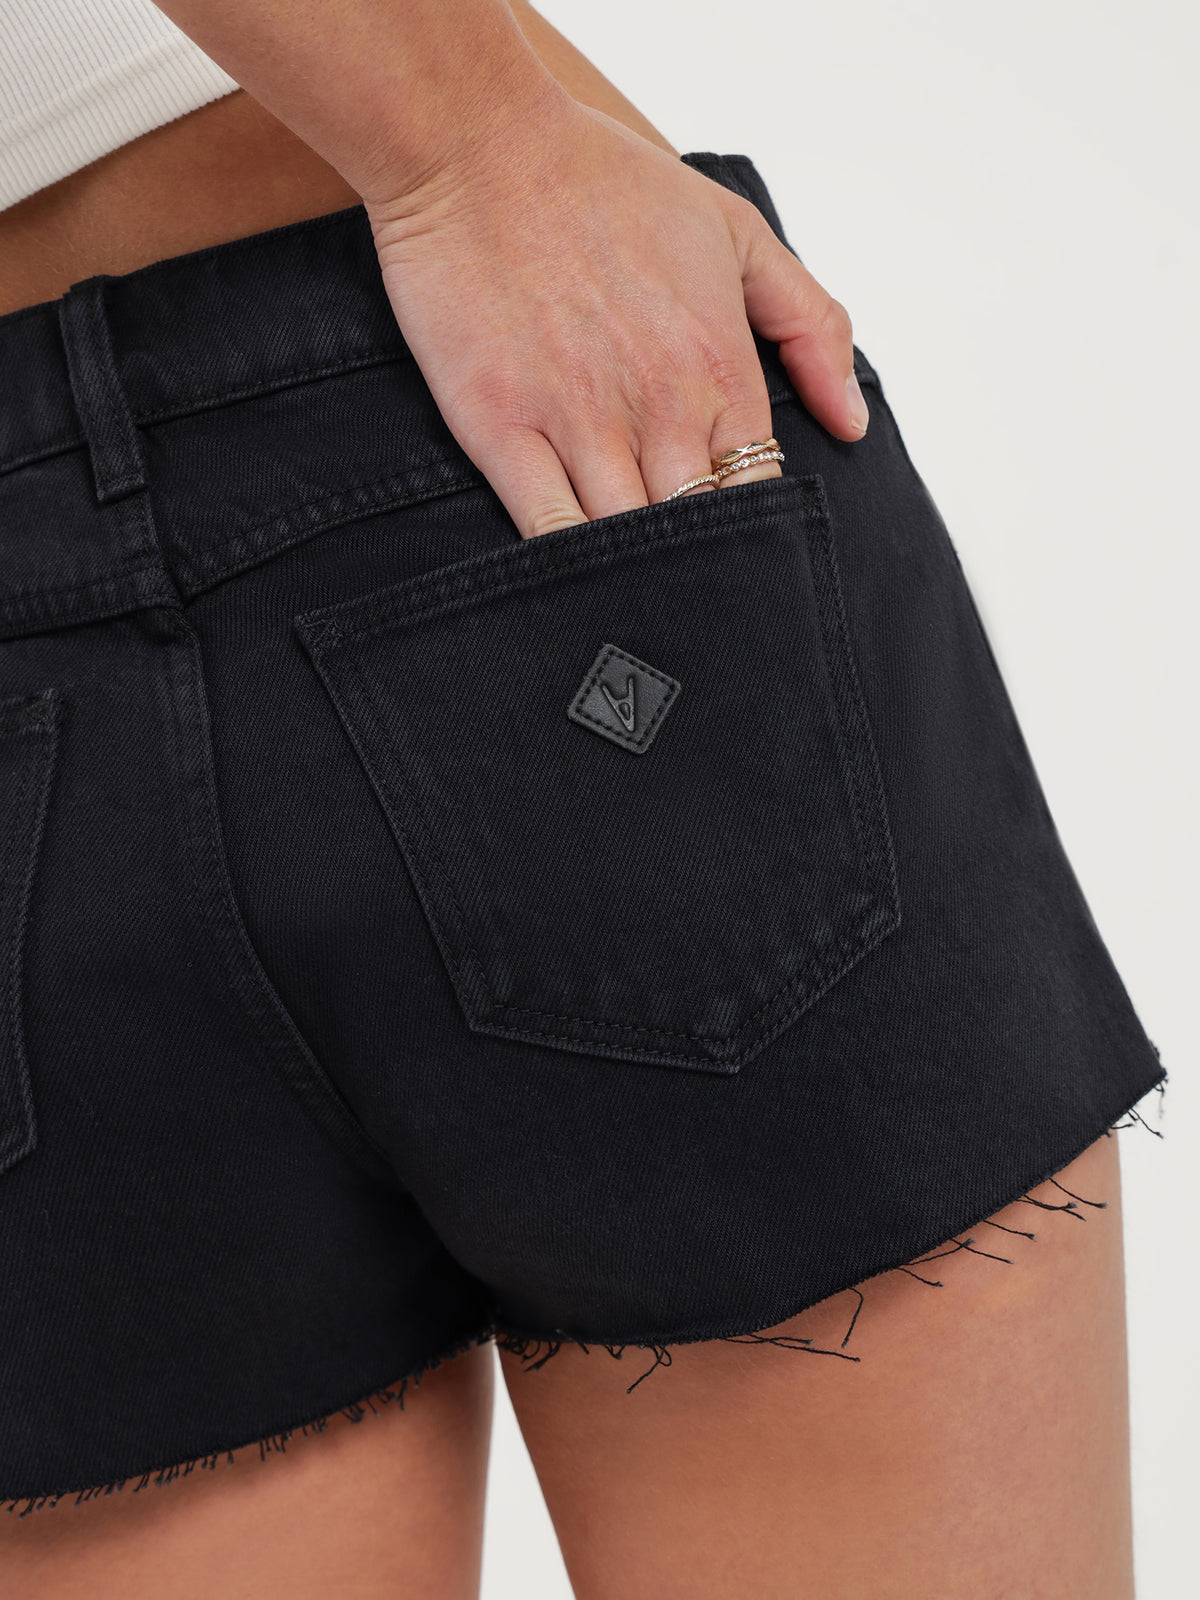 A 99 Low Shorts in Vintage Black